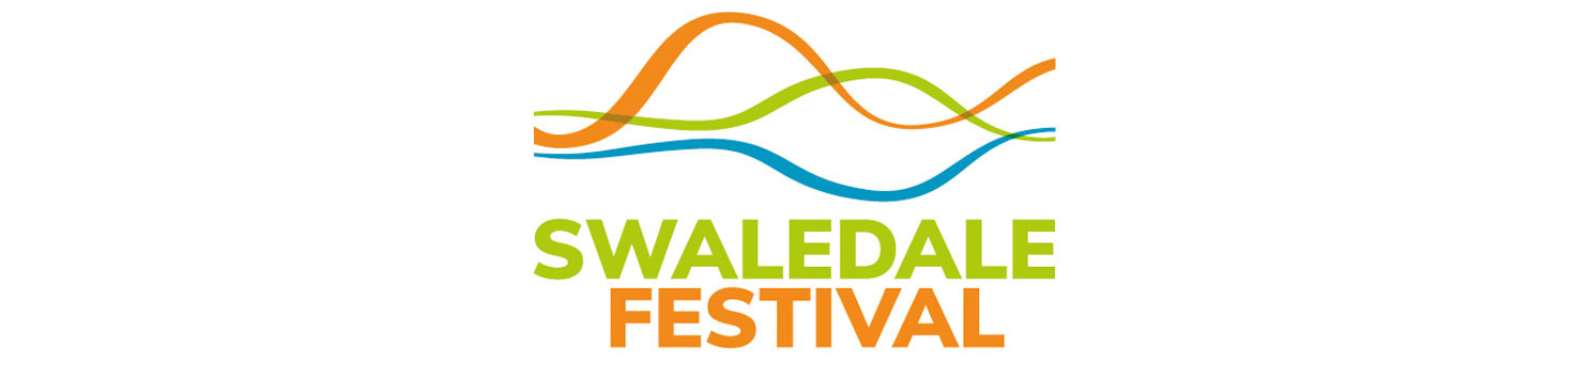 Nature in View - The Wensleydale School - Swaledale Festival